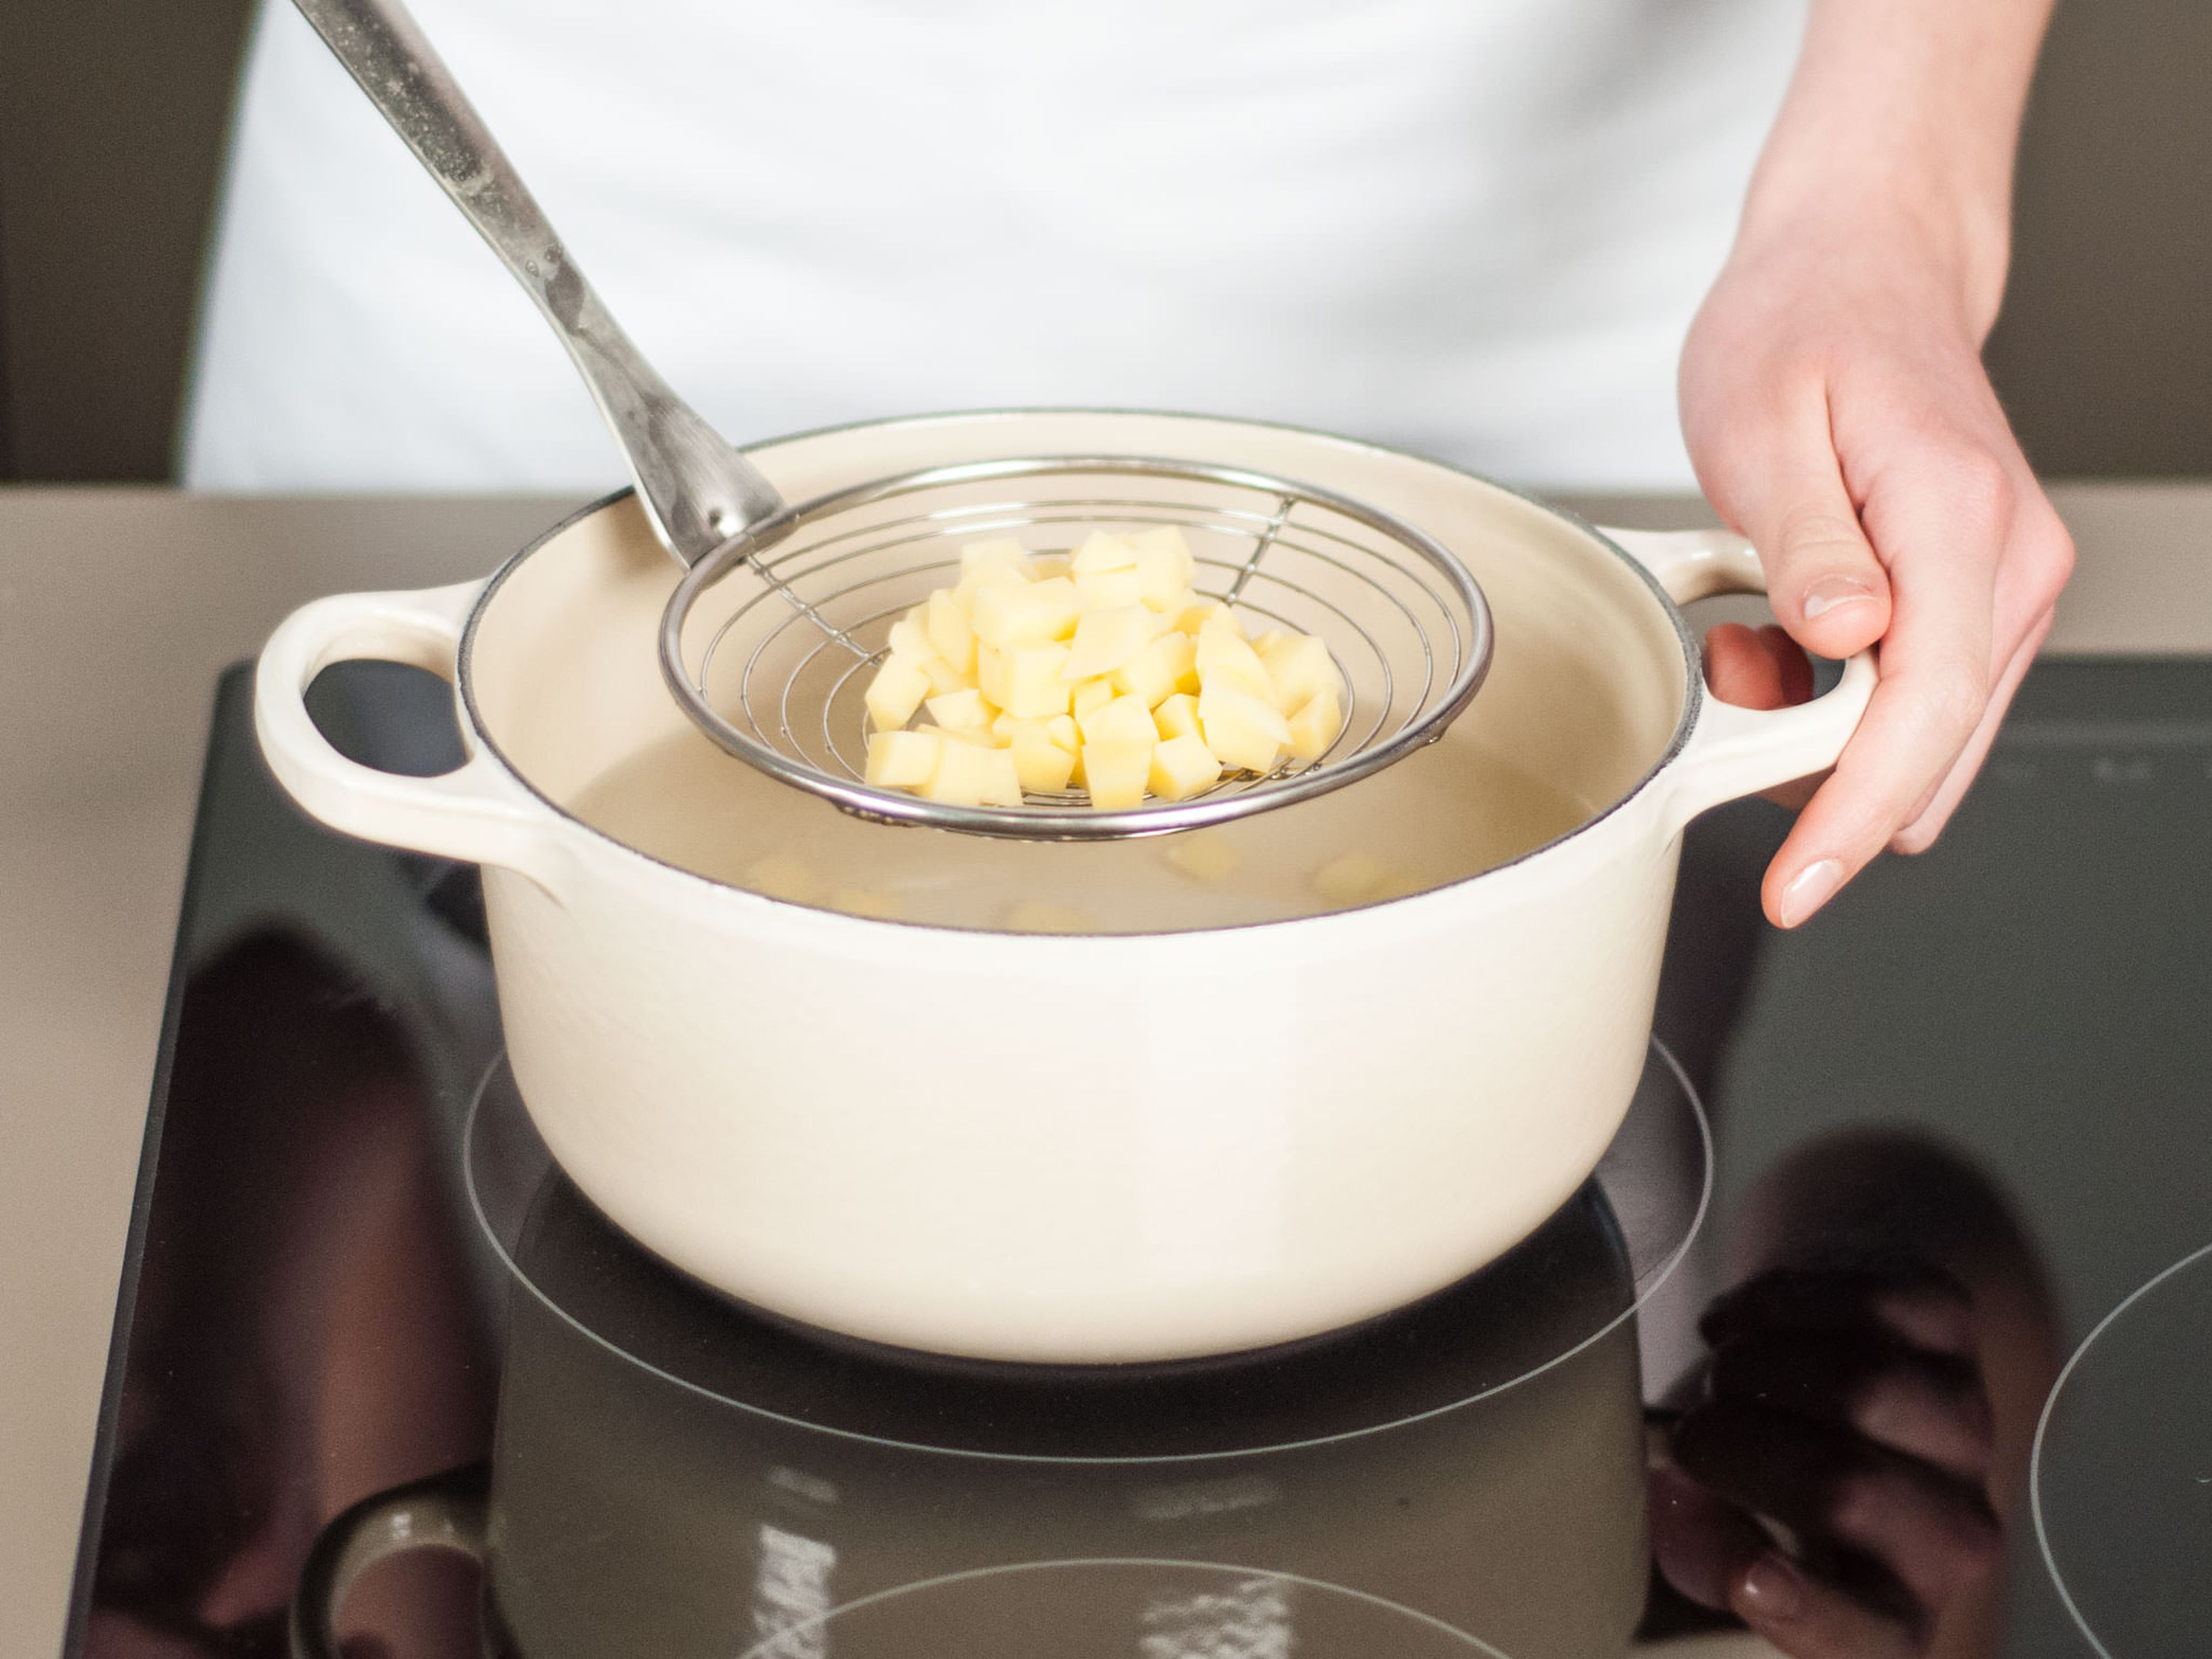 In another saucepan, bring lightly salted water to a boil. Add potato cubes and continue to cook for approx. 10 – 13 min. until cooked through. Then remove from water and set aside.